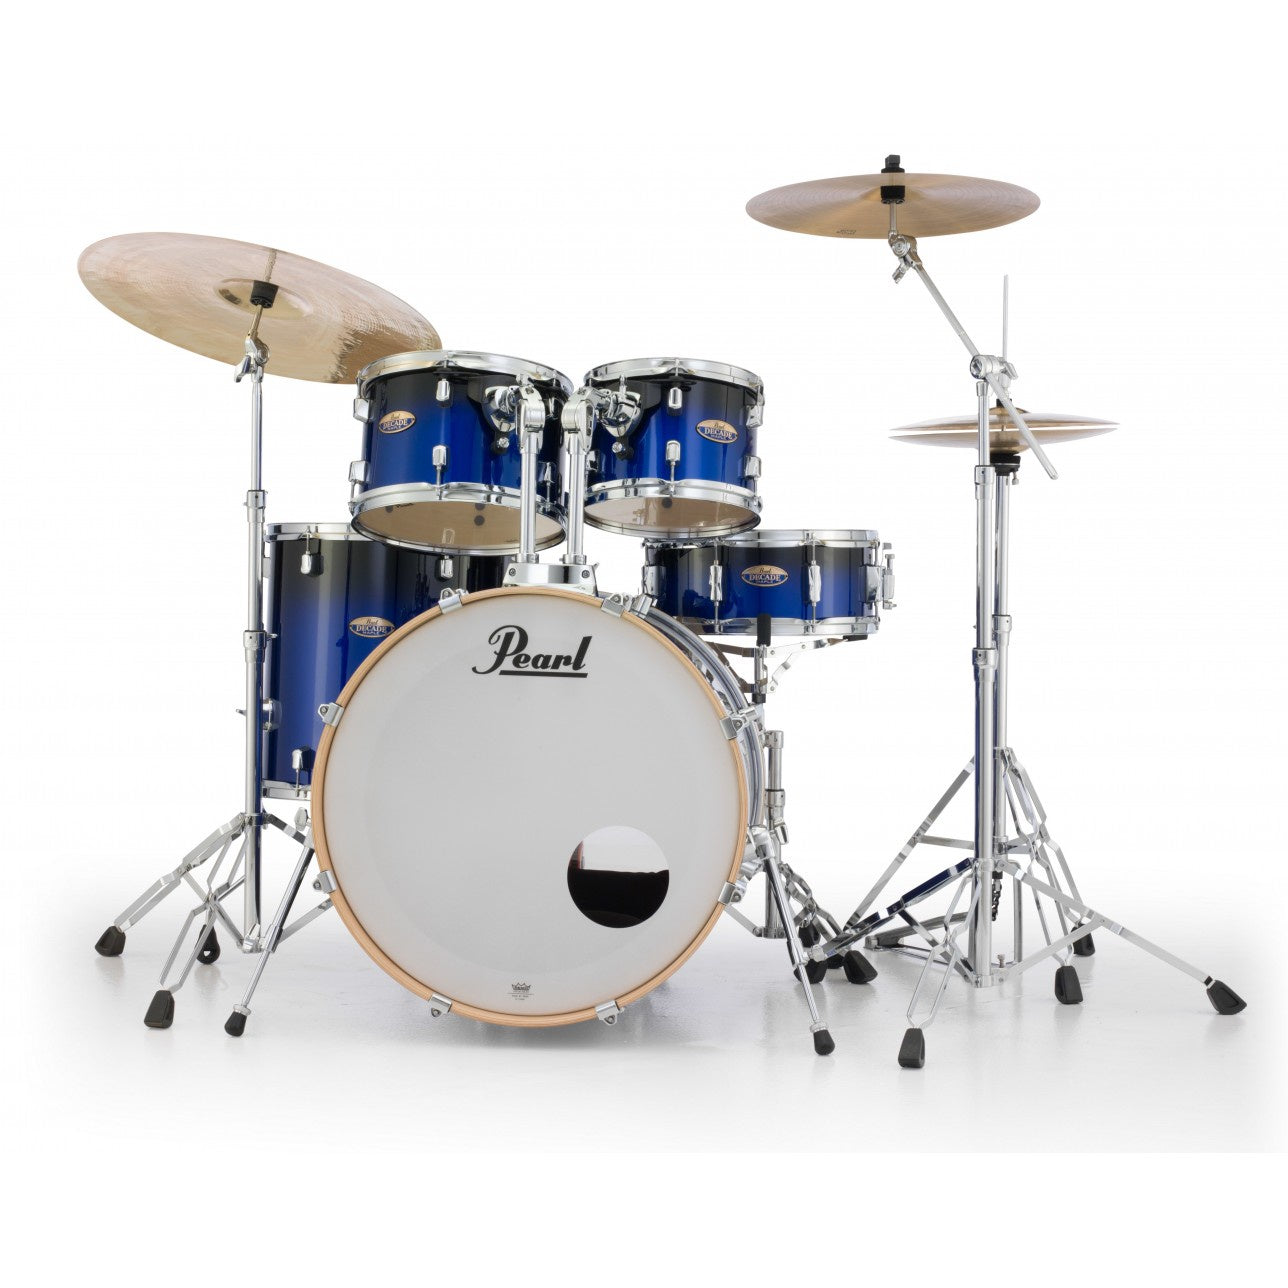 Pearl Decade Maple 22" Fusion Plus 5 Piece Drum Kit in Kobalt Blue Fade Lacquer Finish